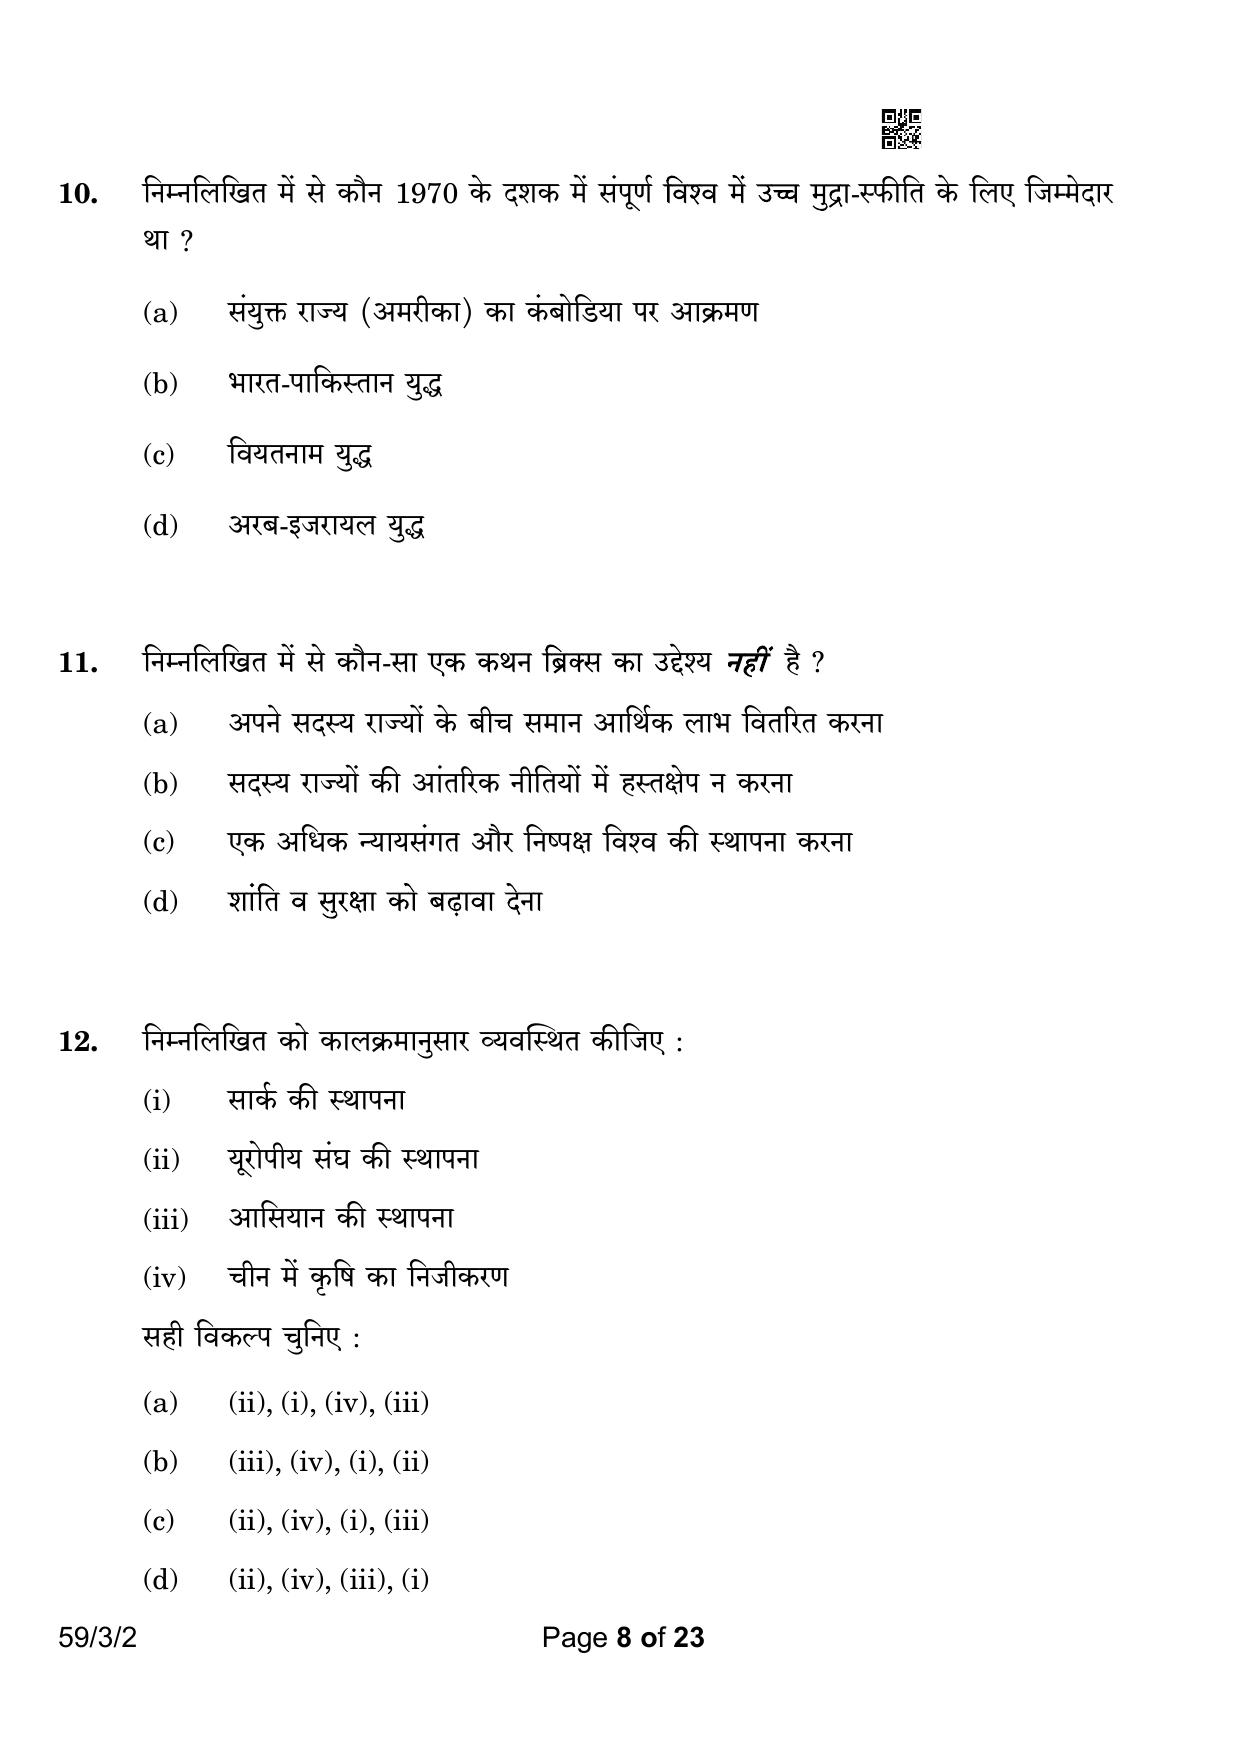 CBSE Class 12 59-3-2 Political Science 2023 Question Paper - Page 8